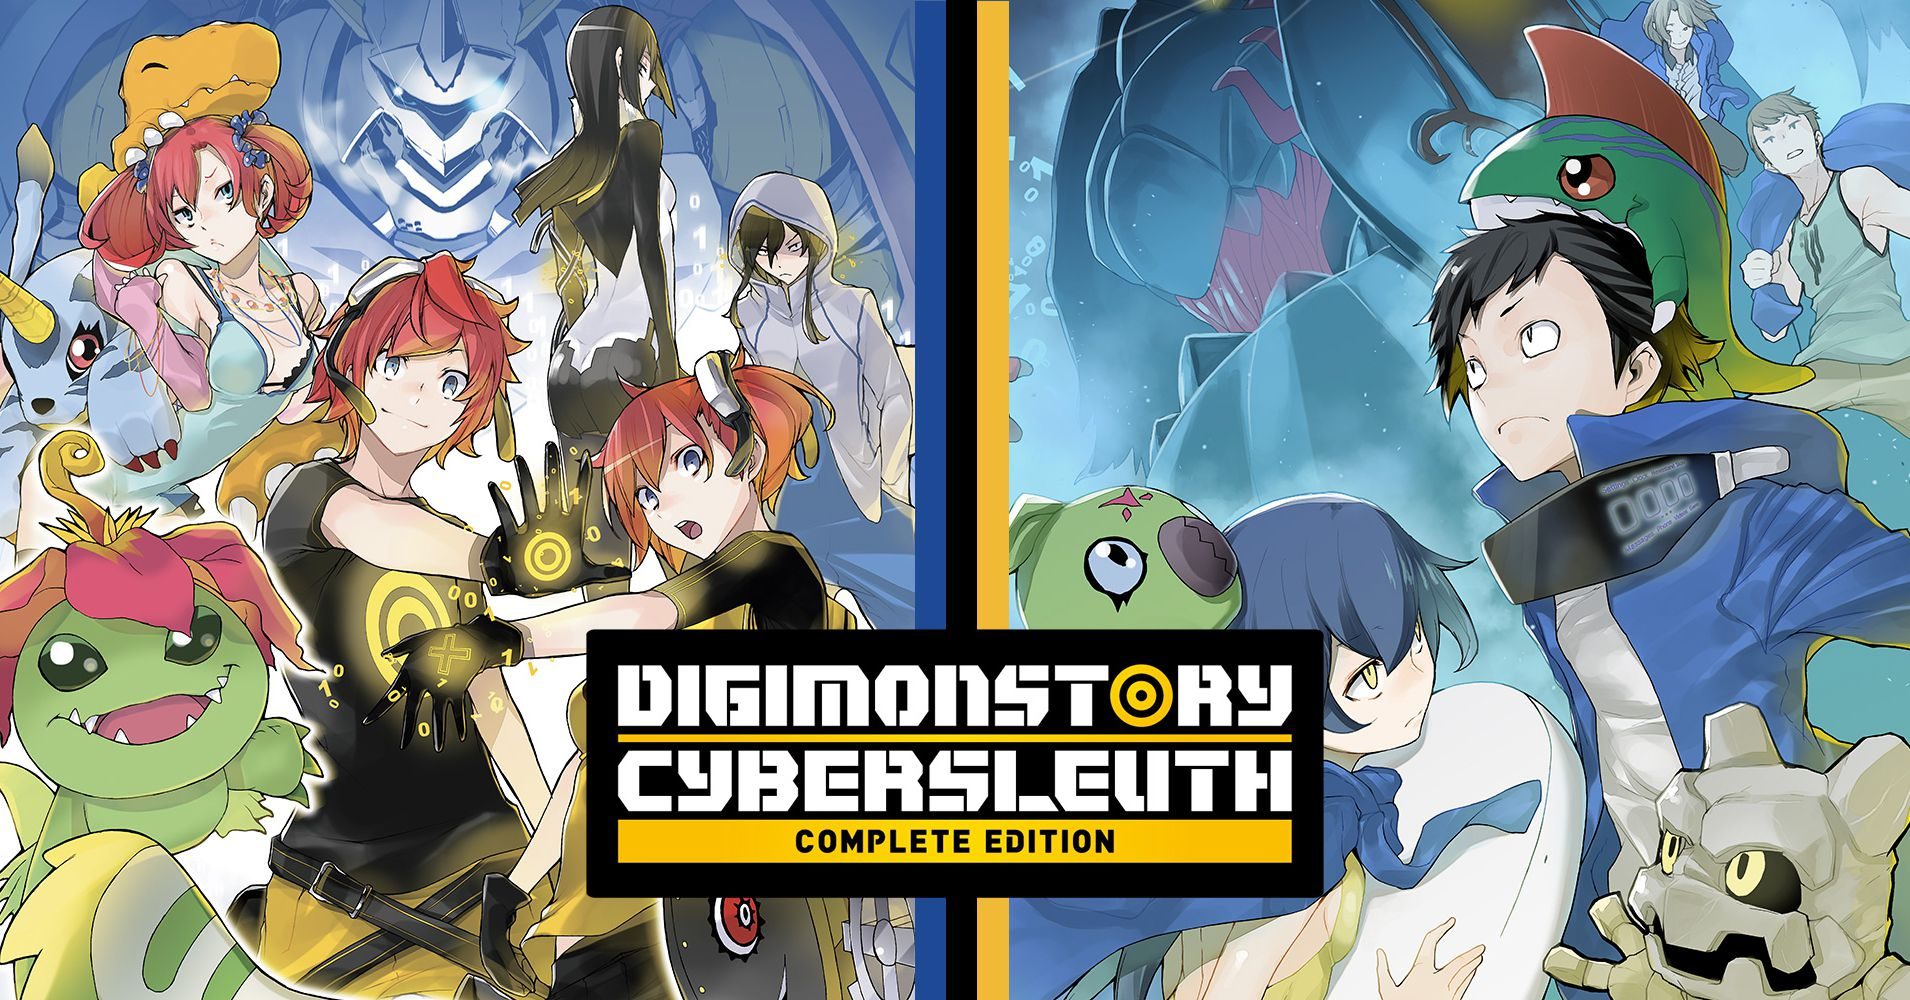 digimon-story-cyber-sleuth-best-games-like-pokemon-pc-console-7451304